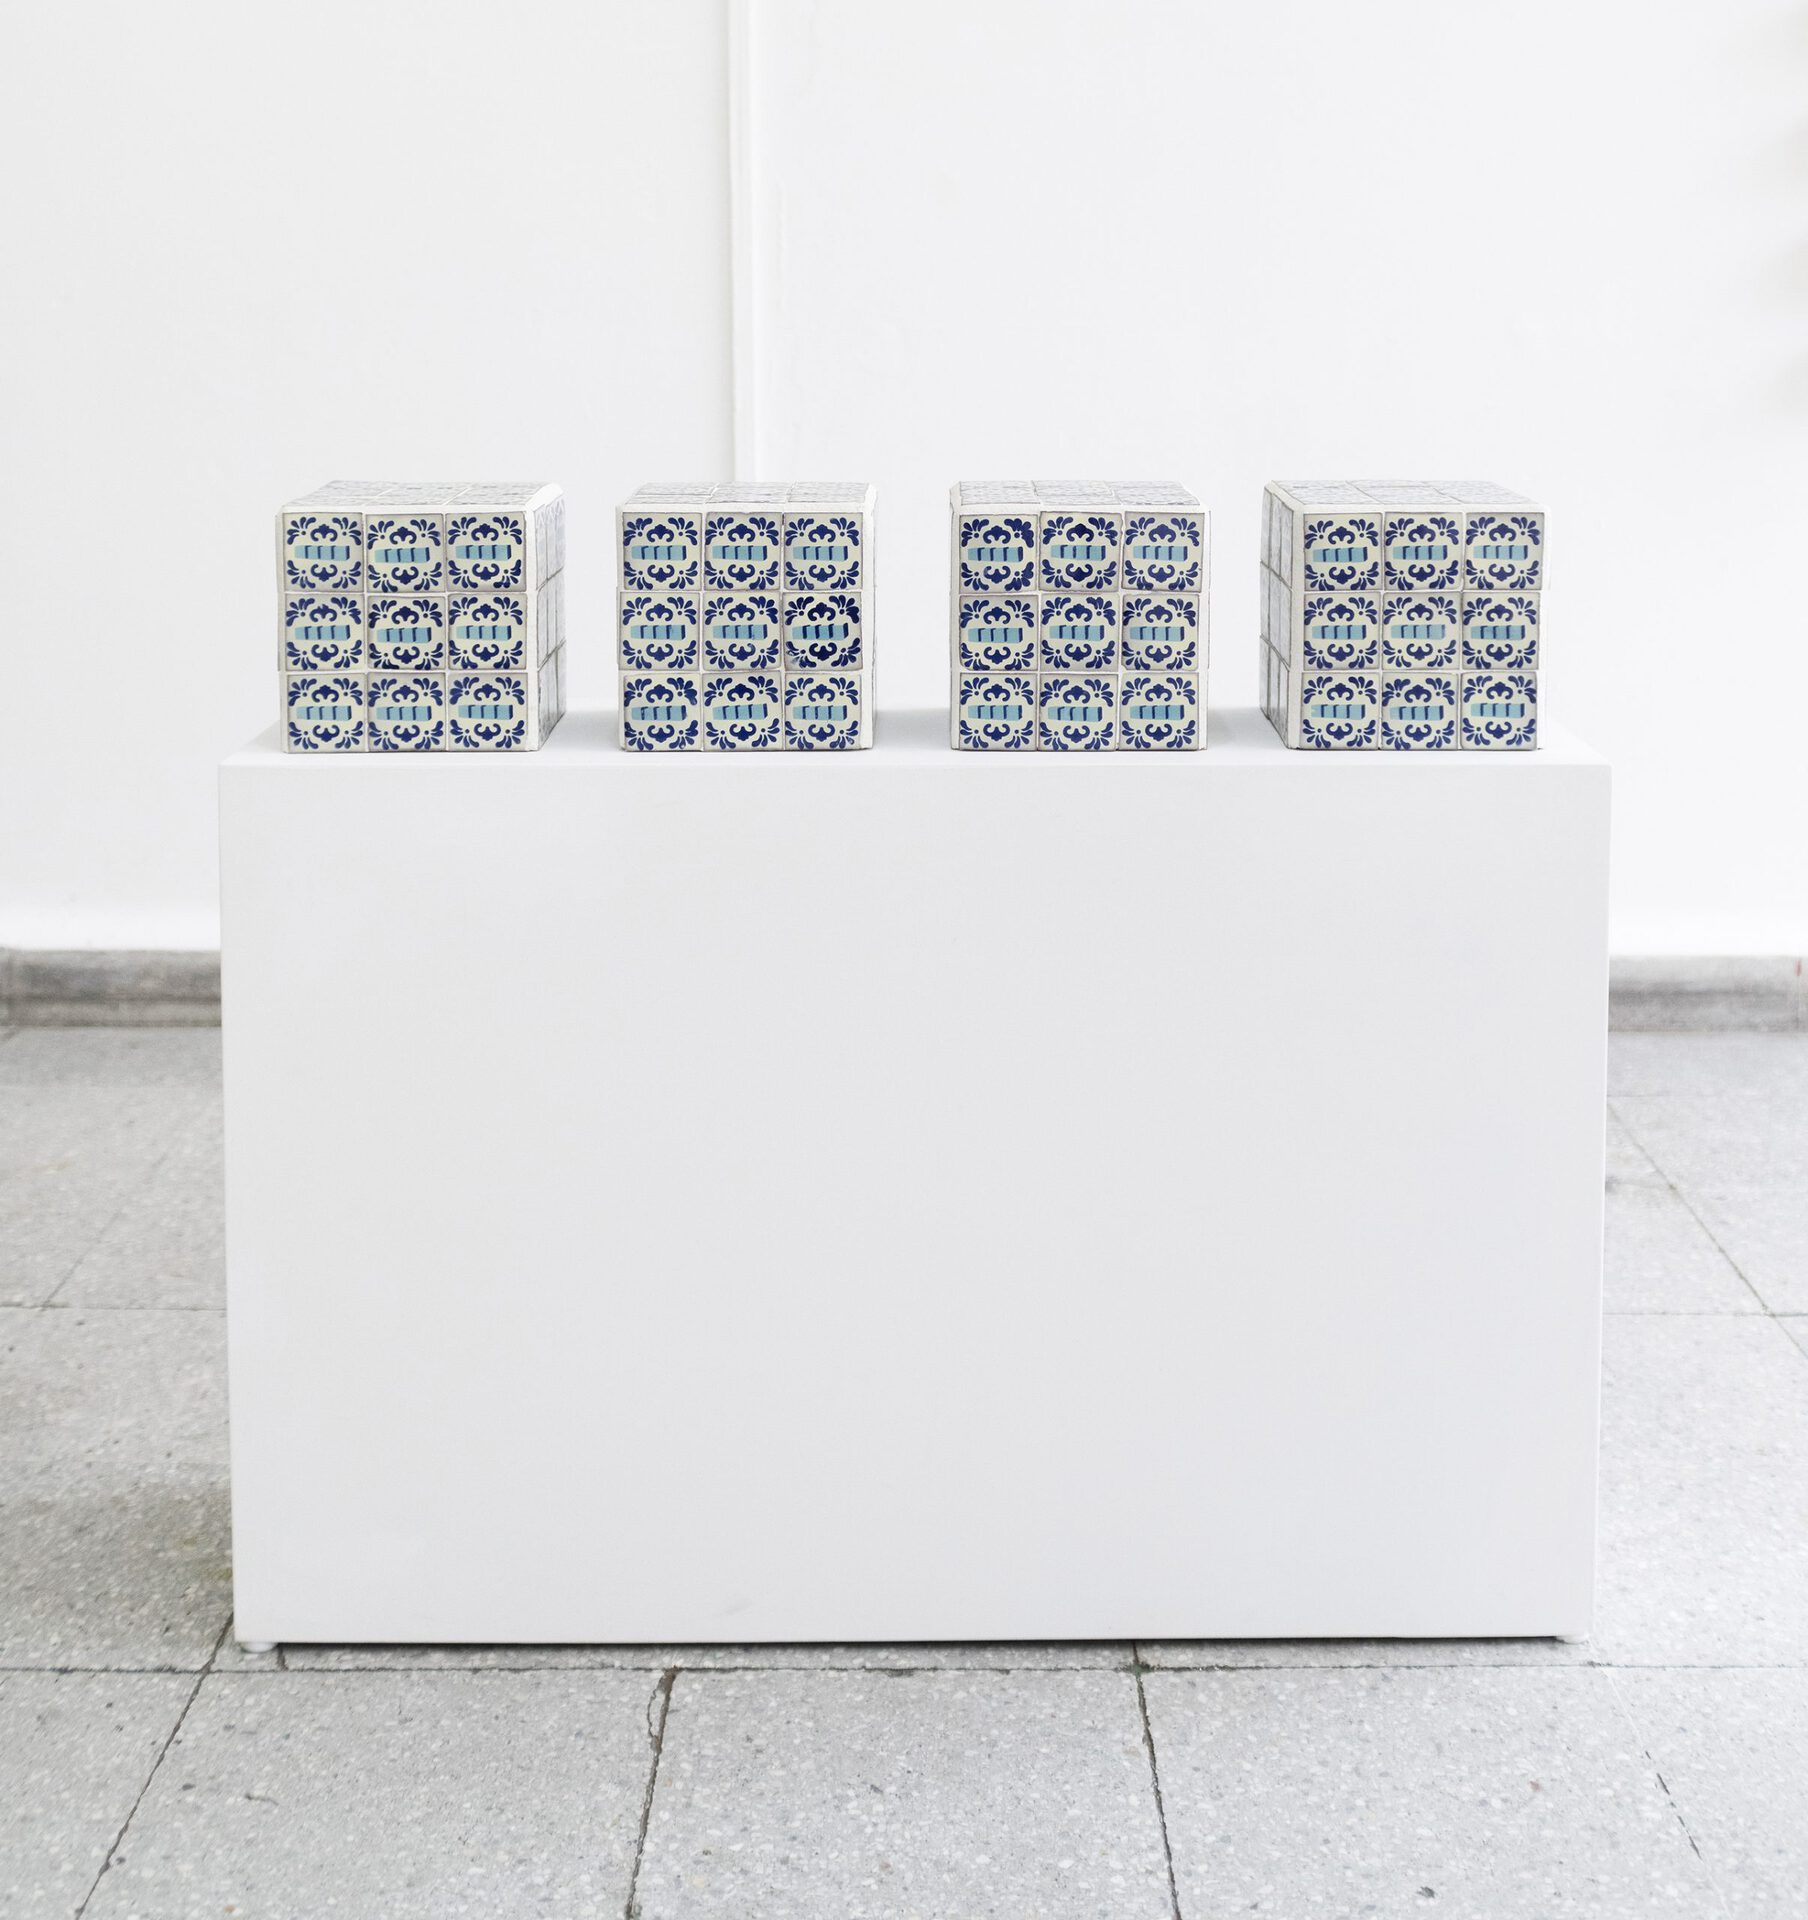 Crafts usually escape the museum and, when they fall into their showcases, they defend themselves with honour (after Untitled by Donald Judd, 1969) MDF, talavera tiles, tile joint filer 17 x 81.5 x 17 cm (6.6 x 32 x 6.6 in) 2021